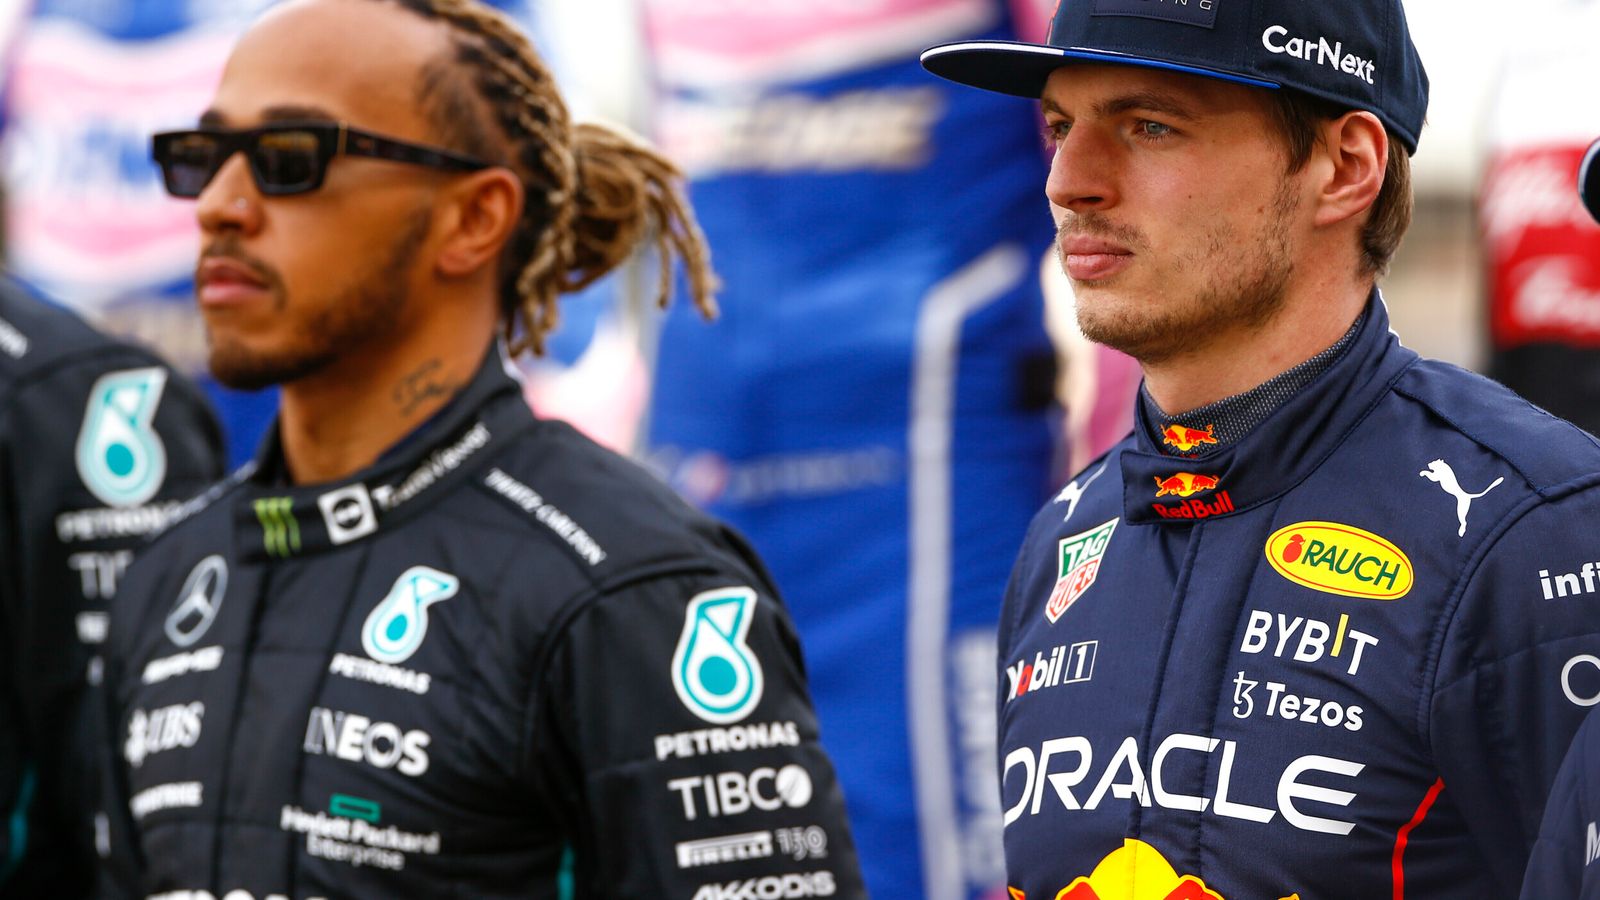 British GP on Sky Sports: Mercedes and Lewis Hamilton’s renewed hope but can anyone stop Max Verstappen?